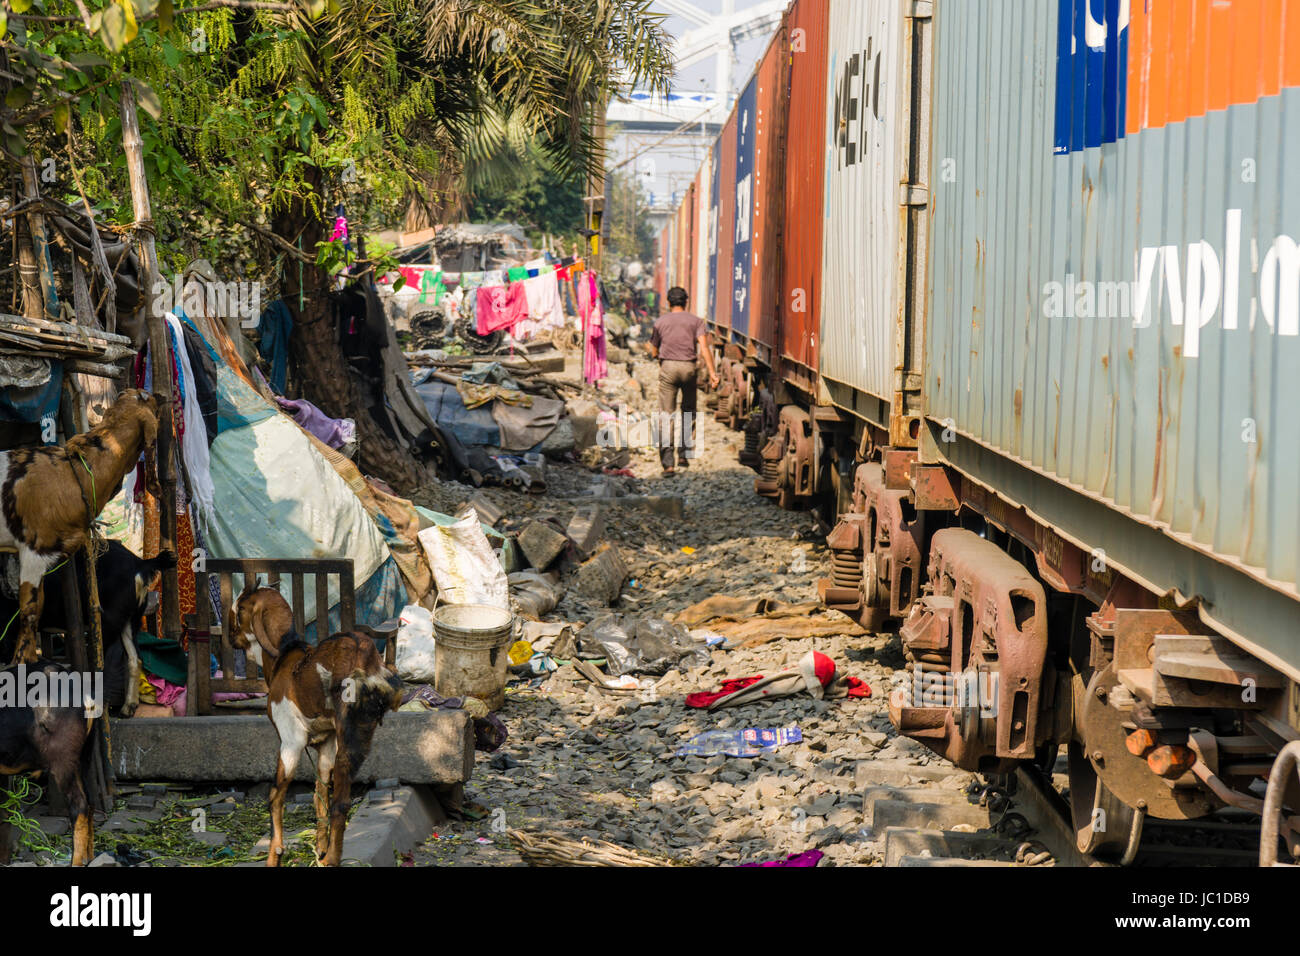 The dwellings in Park Circus slum area are located right next to the railroad tracks, a train is passing through Stock Photo